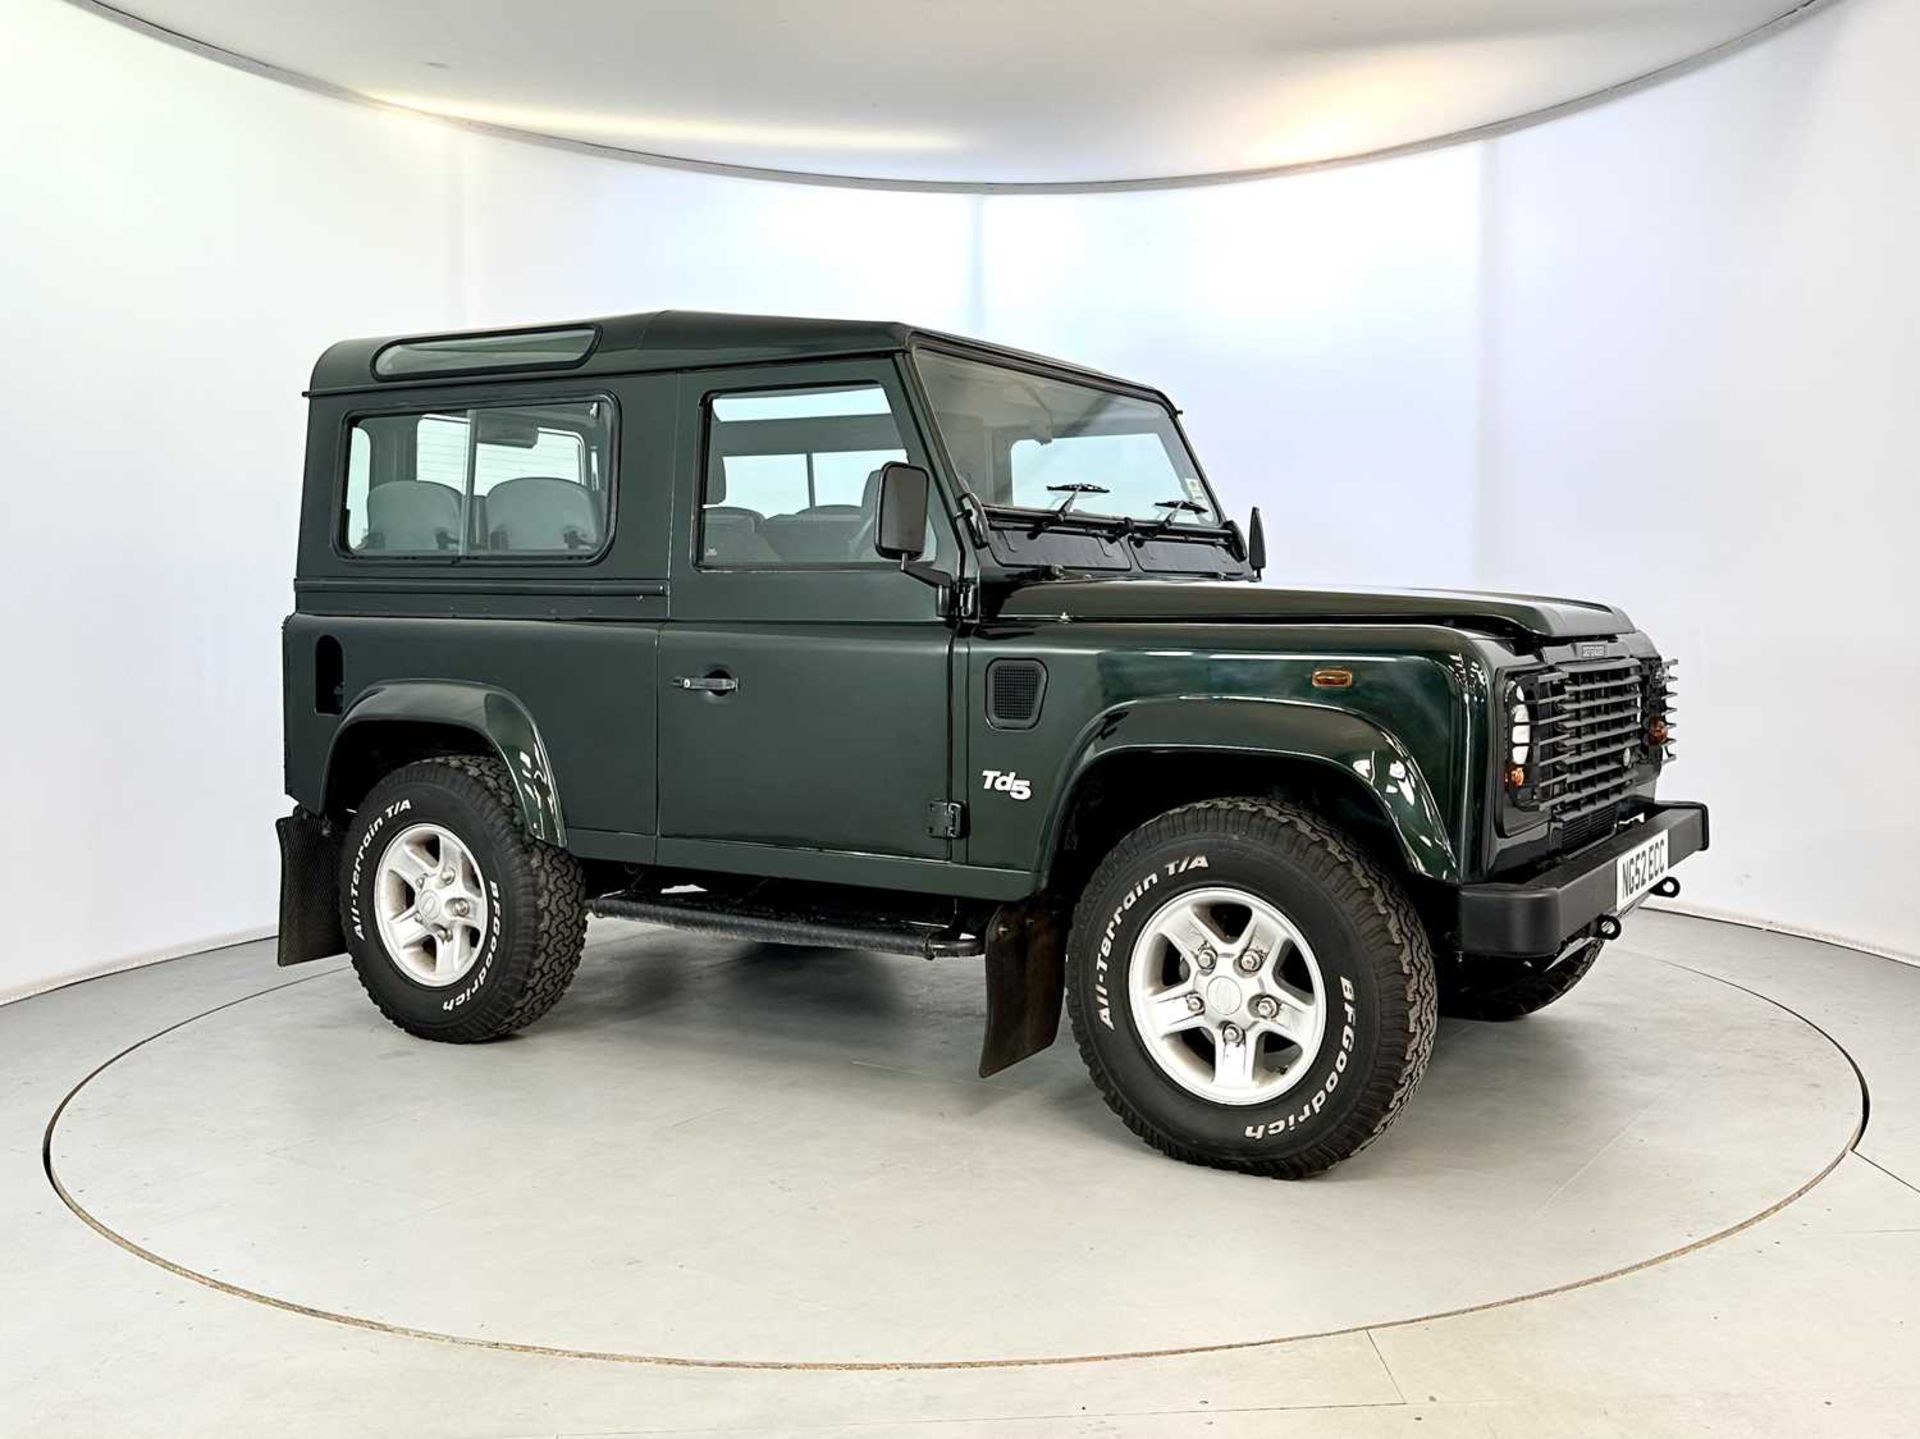 2002 Land Rover Defender 90 TD5 County - Image 12 of 28